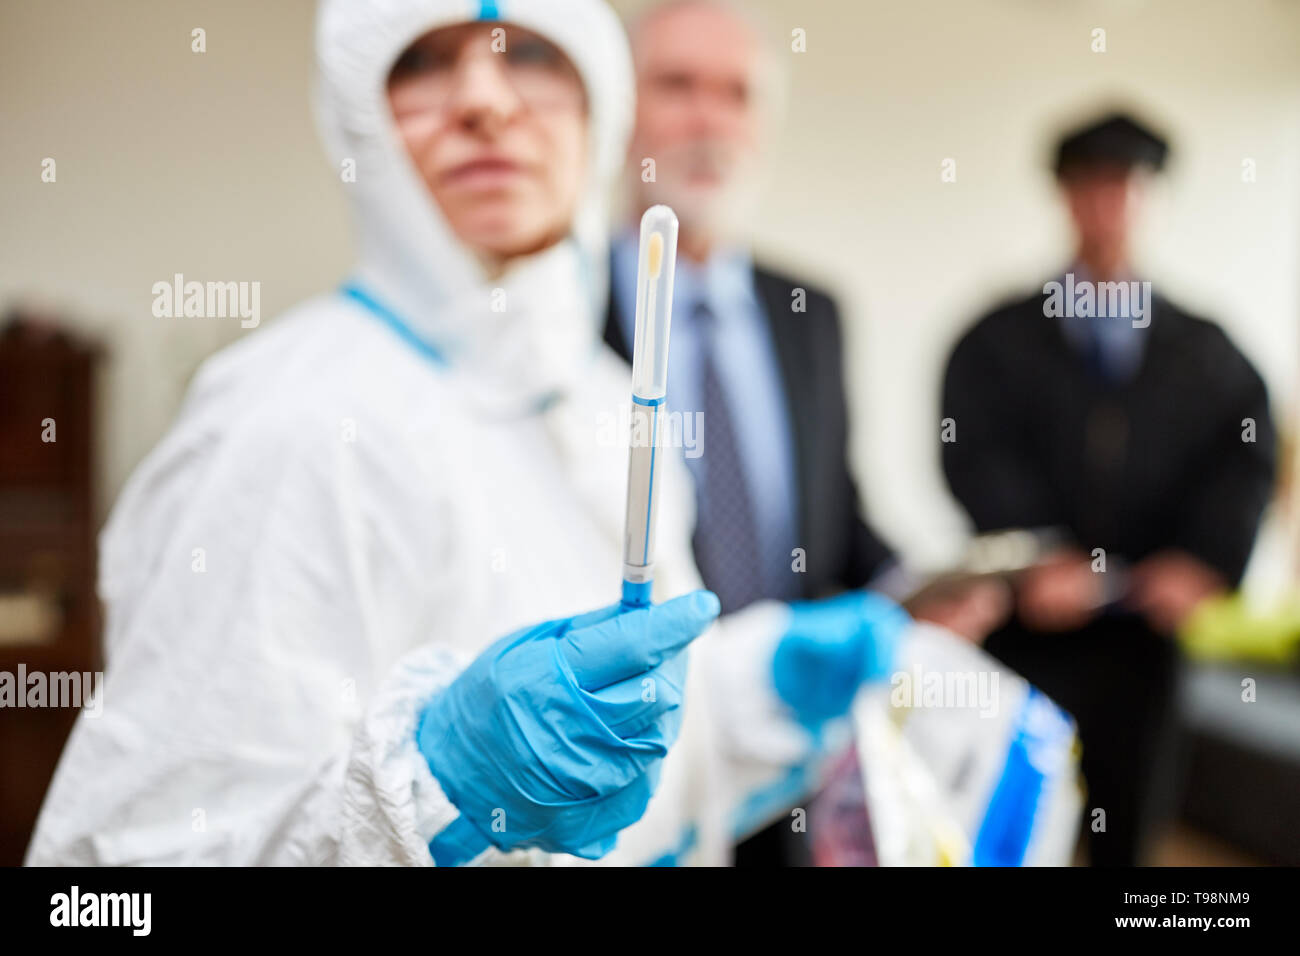 Forensic Technician shows swabs to remove DNA at the scene after a crime Stock Photo